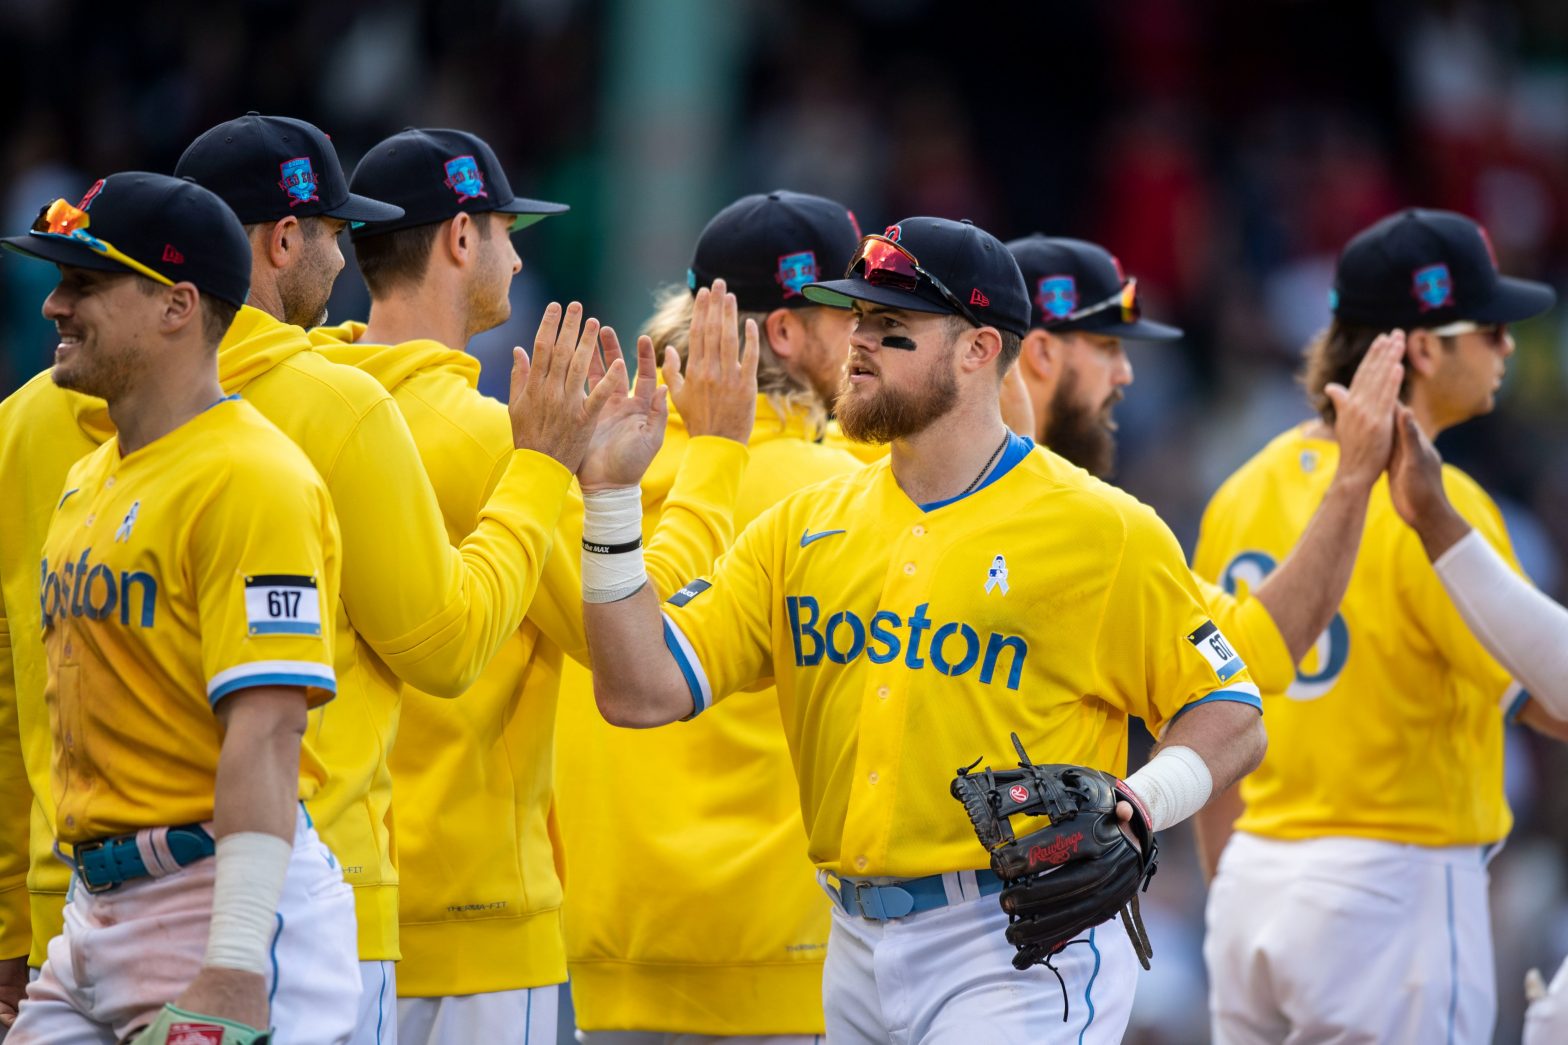 Why did the Red Sox wear yellow and blue against New York Yankees